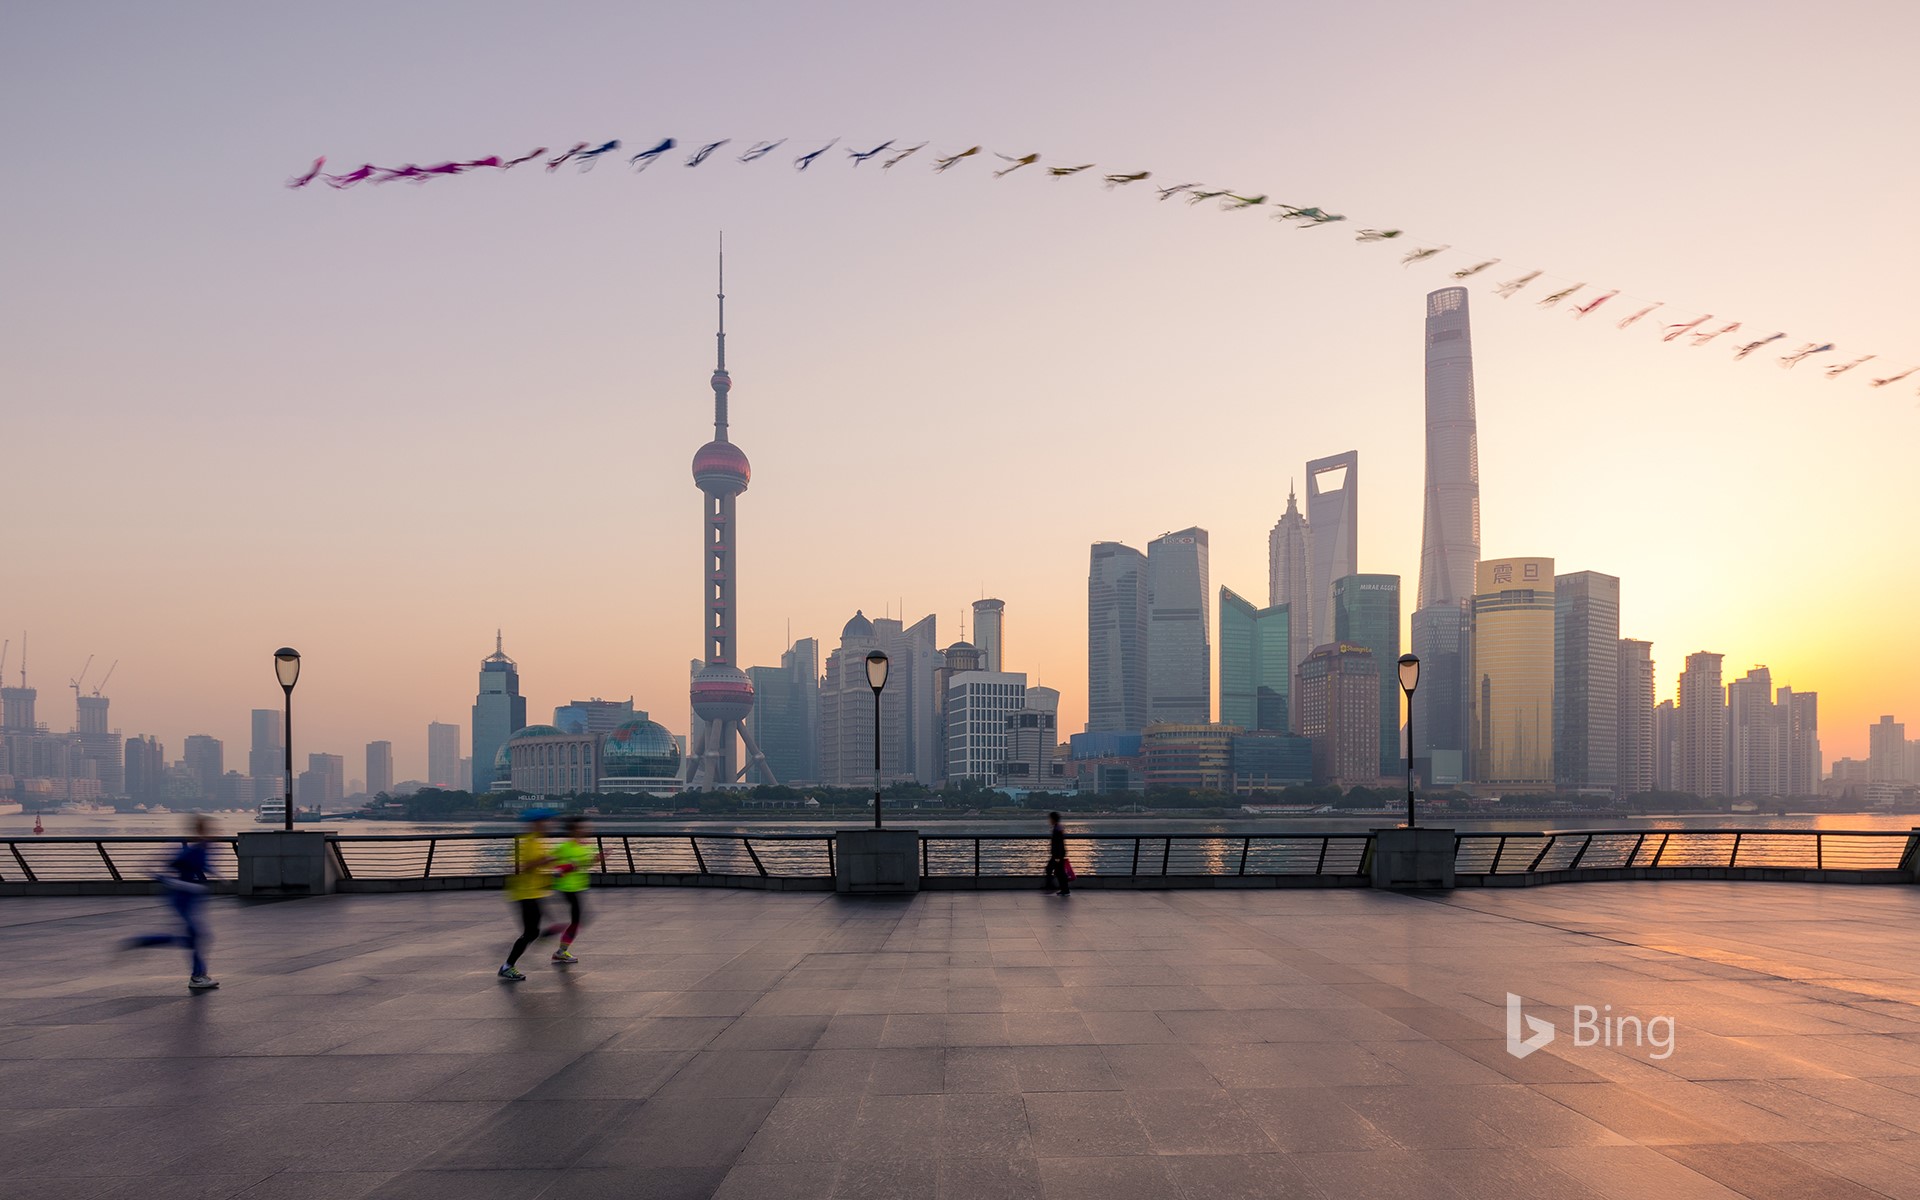 [Autumn Equinox Today] A kite in the morning in the morning, Shanghai, China